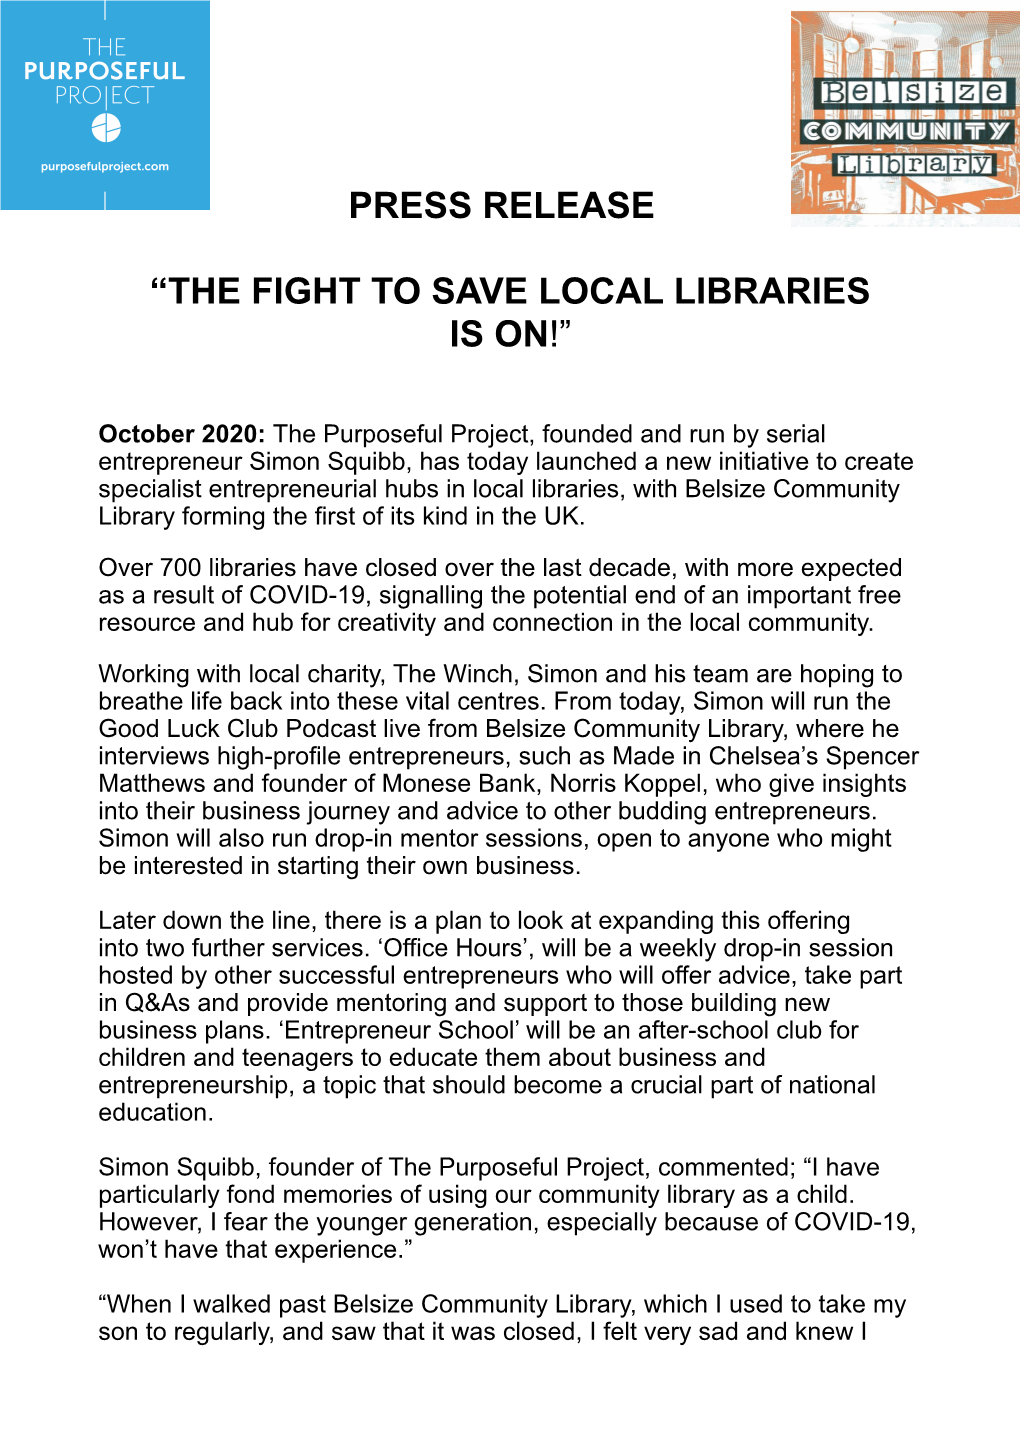 The Fight to Save Local Libraries Is On!”